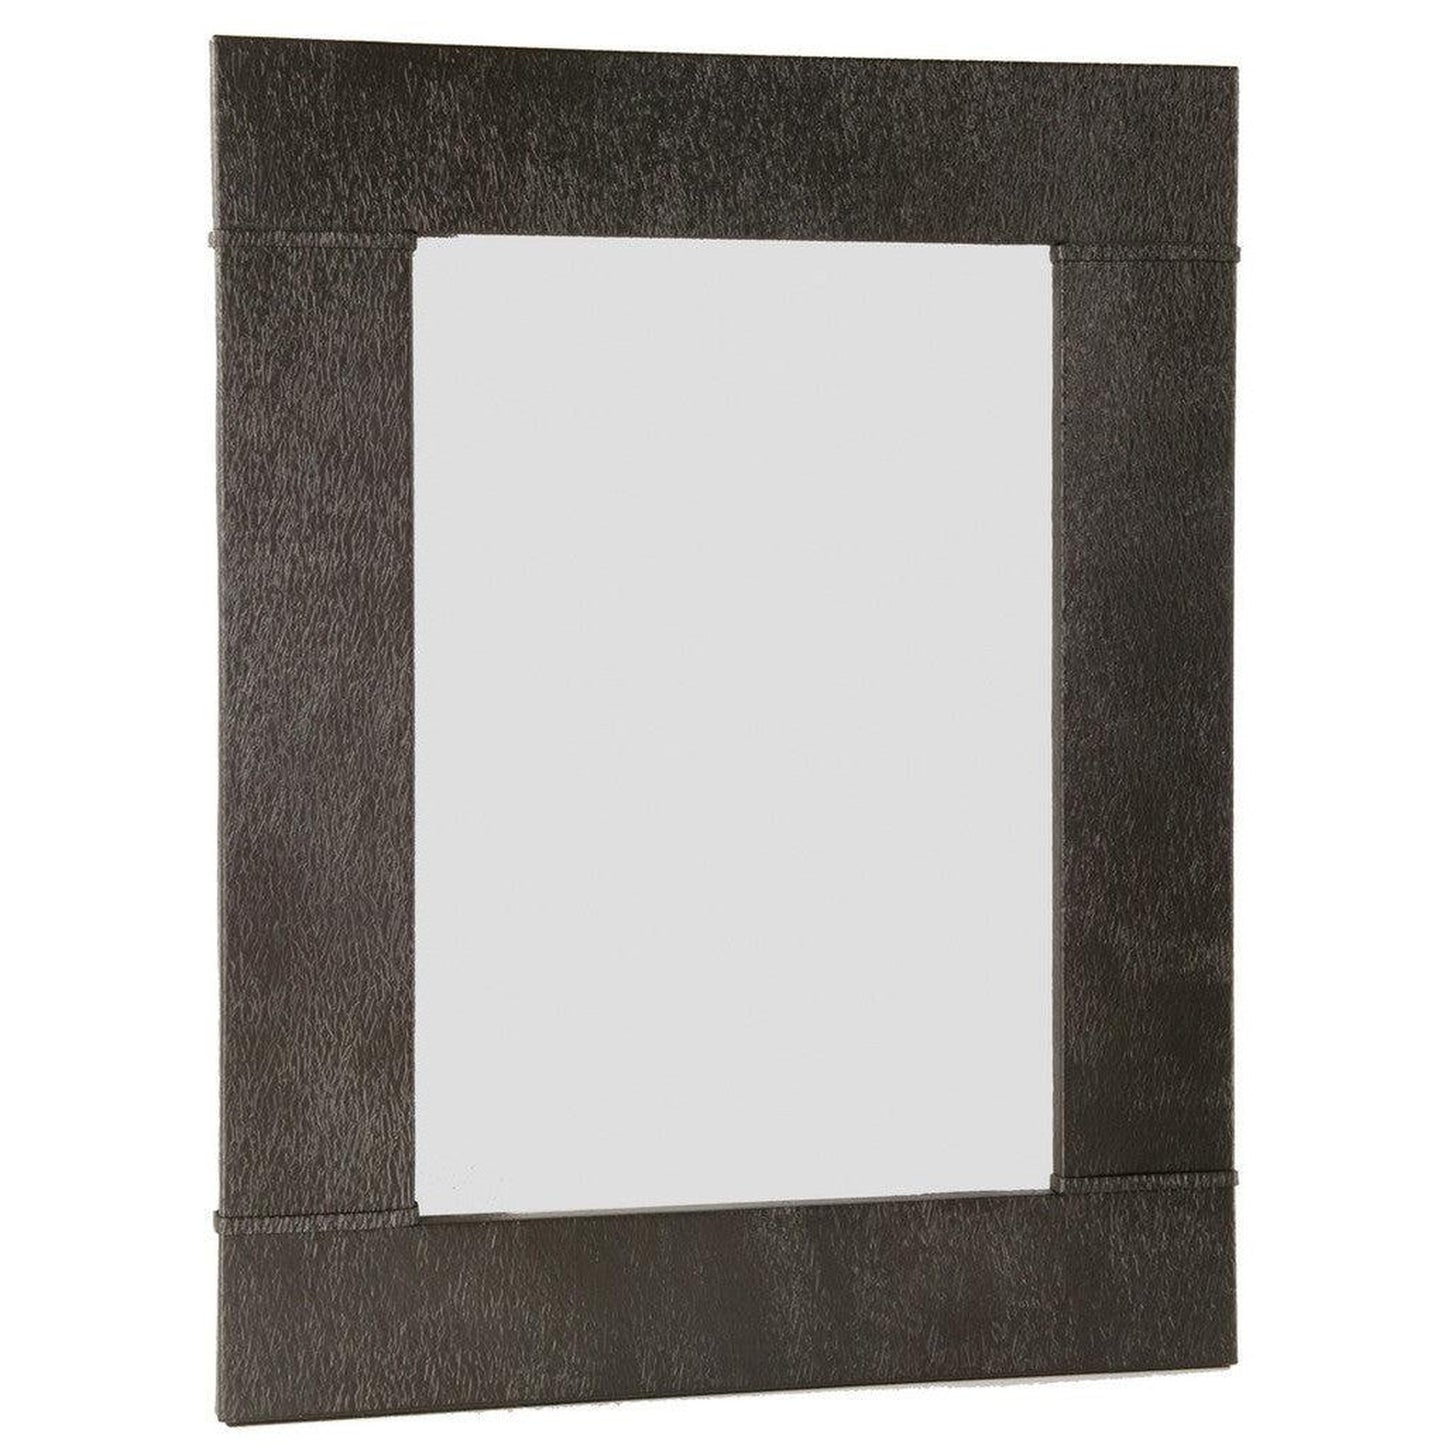 Stone County Ironworks Cedarvale 37" x 45" Large Satin Black Iron Wall Mirror With Copper Iron Accent